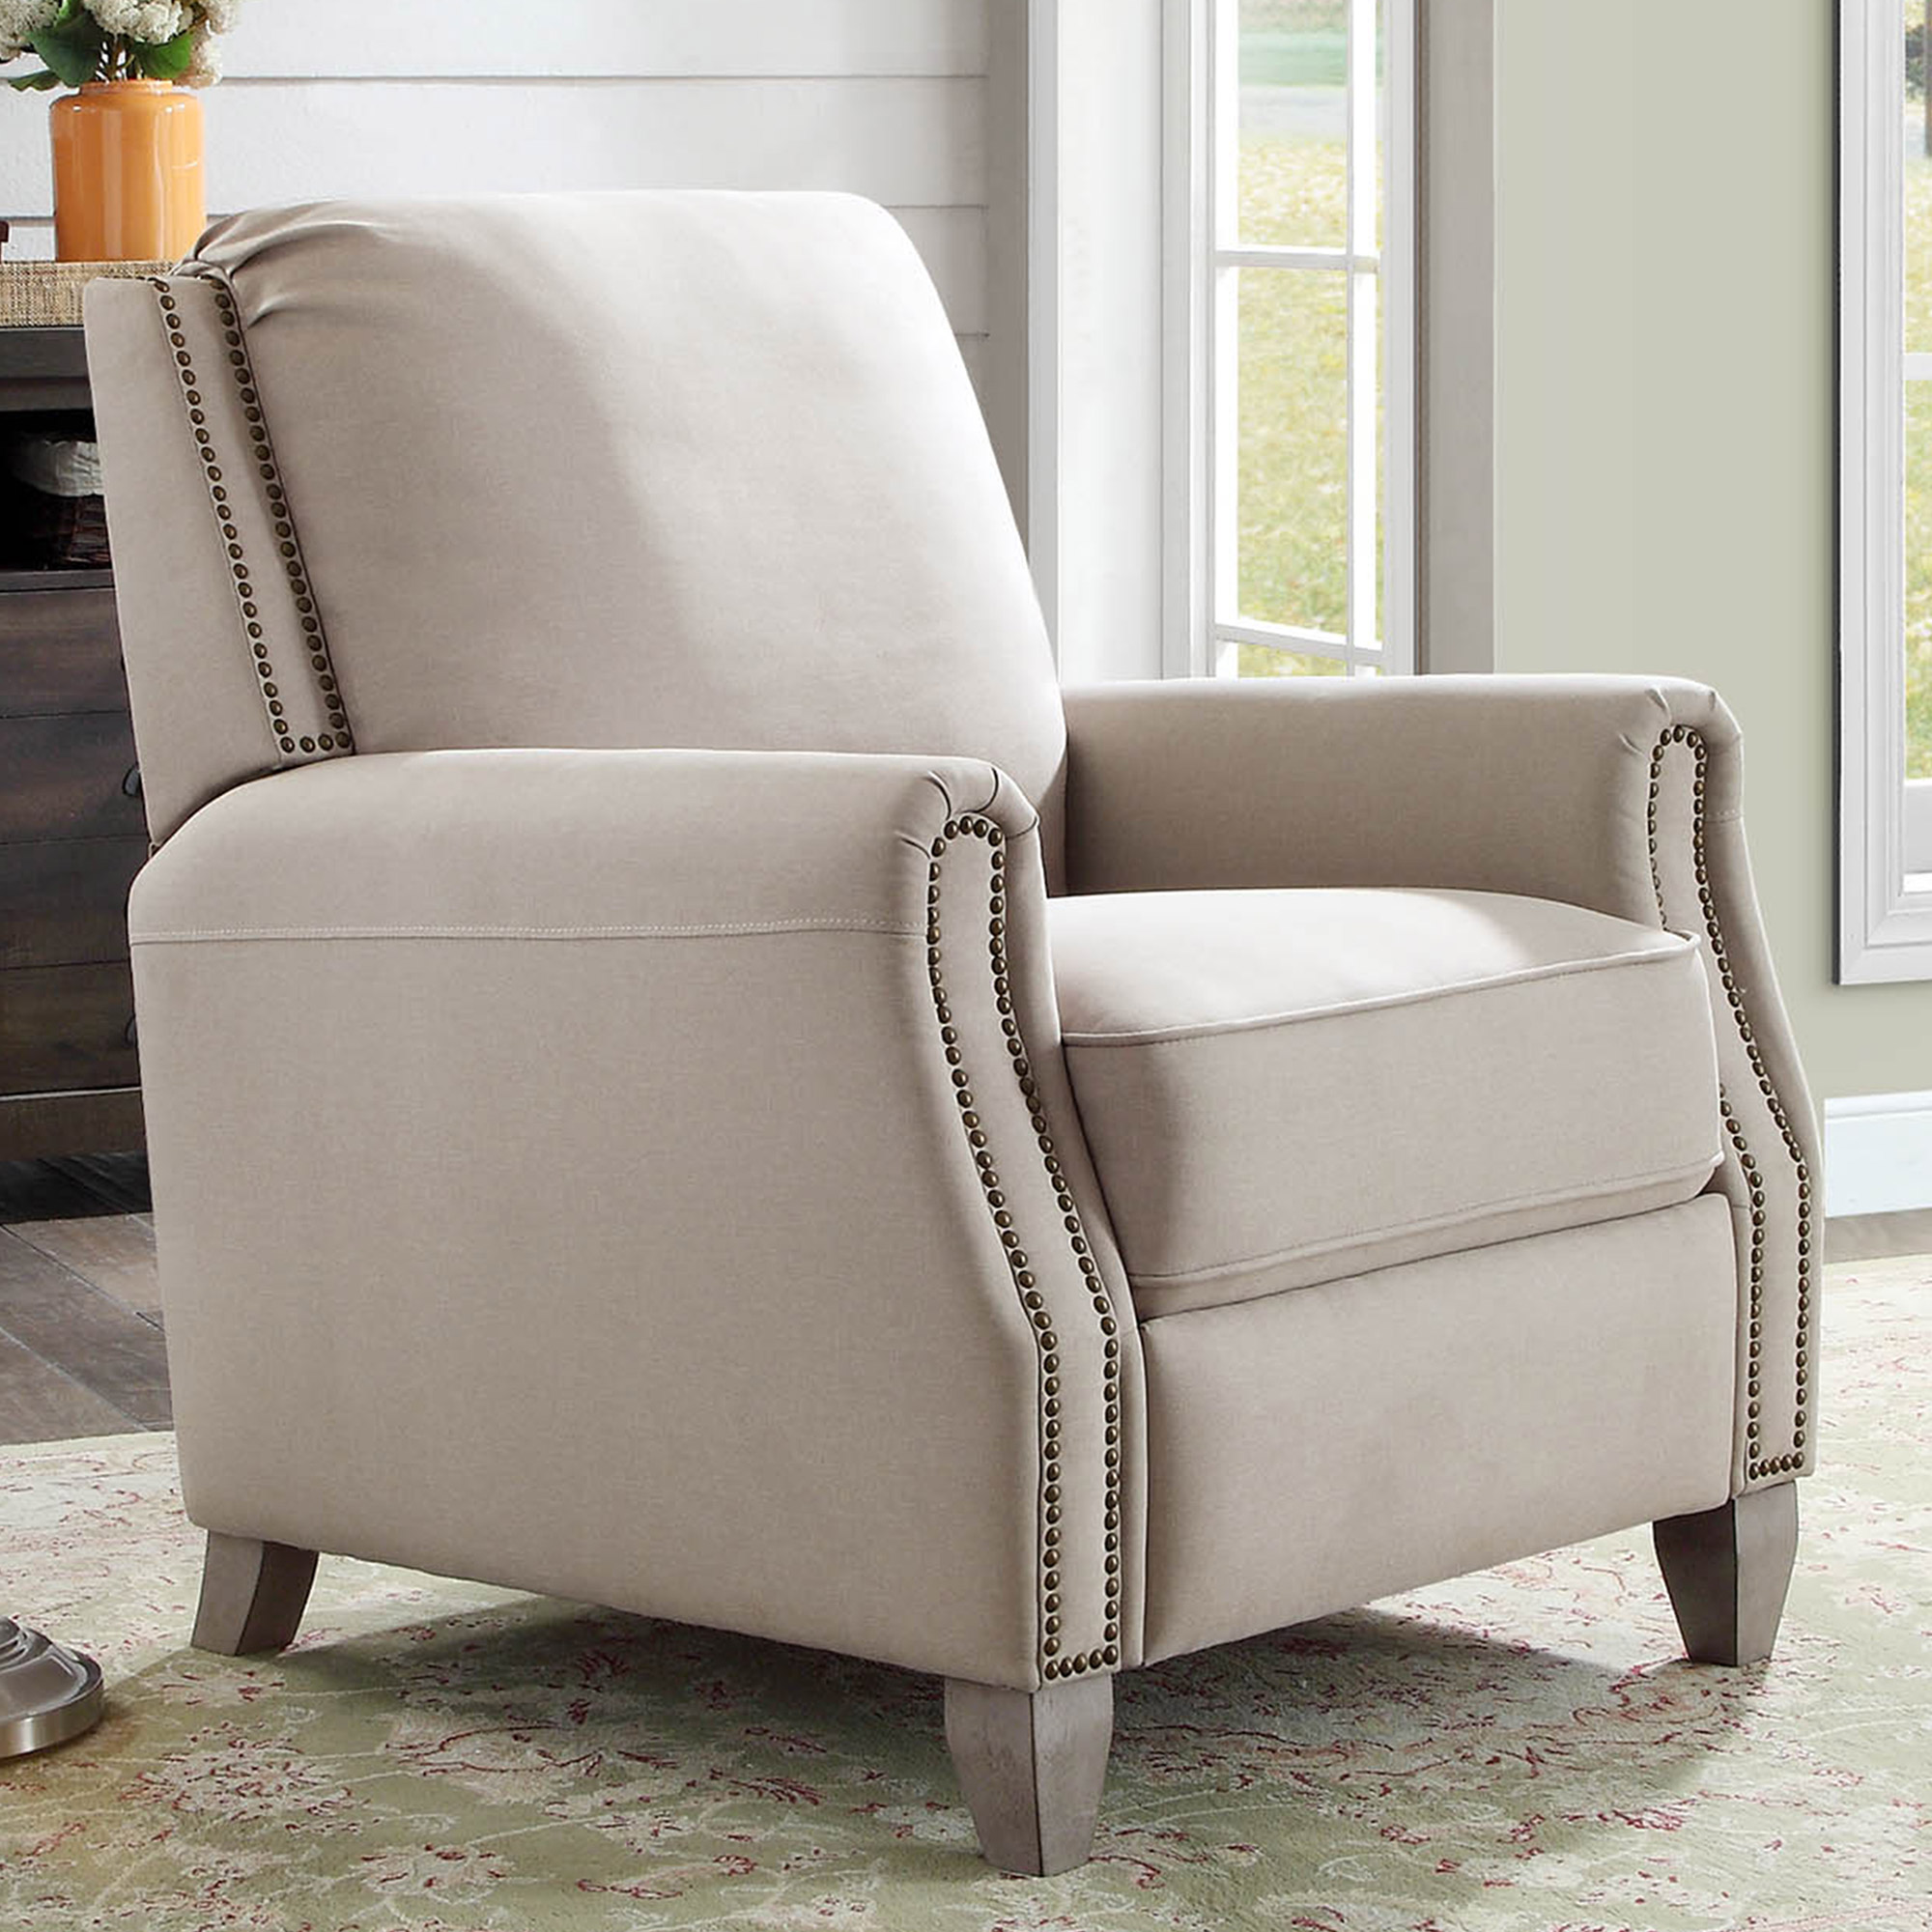 Better Homes and Gardens Pushback Recliner, Taupe Fabric Upholstery - image 3 of 7